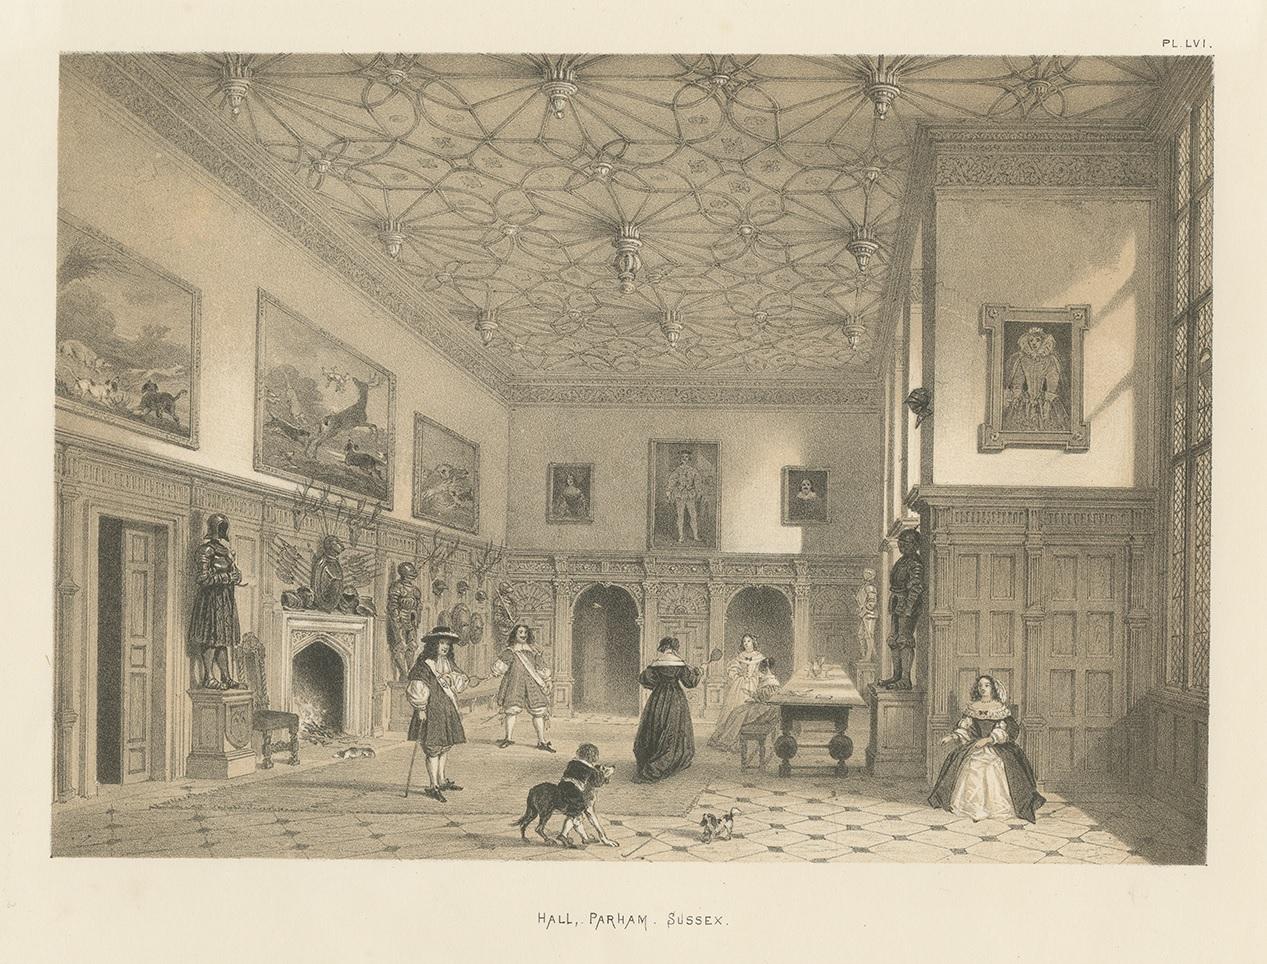 Antique print titled 'Hall. Parham. Sussex'. Lithograph of the great hall of Parham House. Parham House is an Elizabethan house and estate in Sussex, England. This print originates from 'The Mansions of England in the Olden Time' by Joseph Nash.